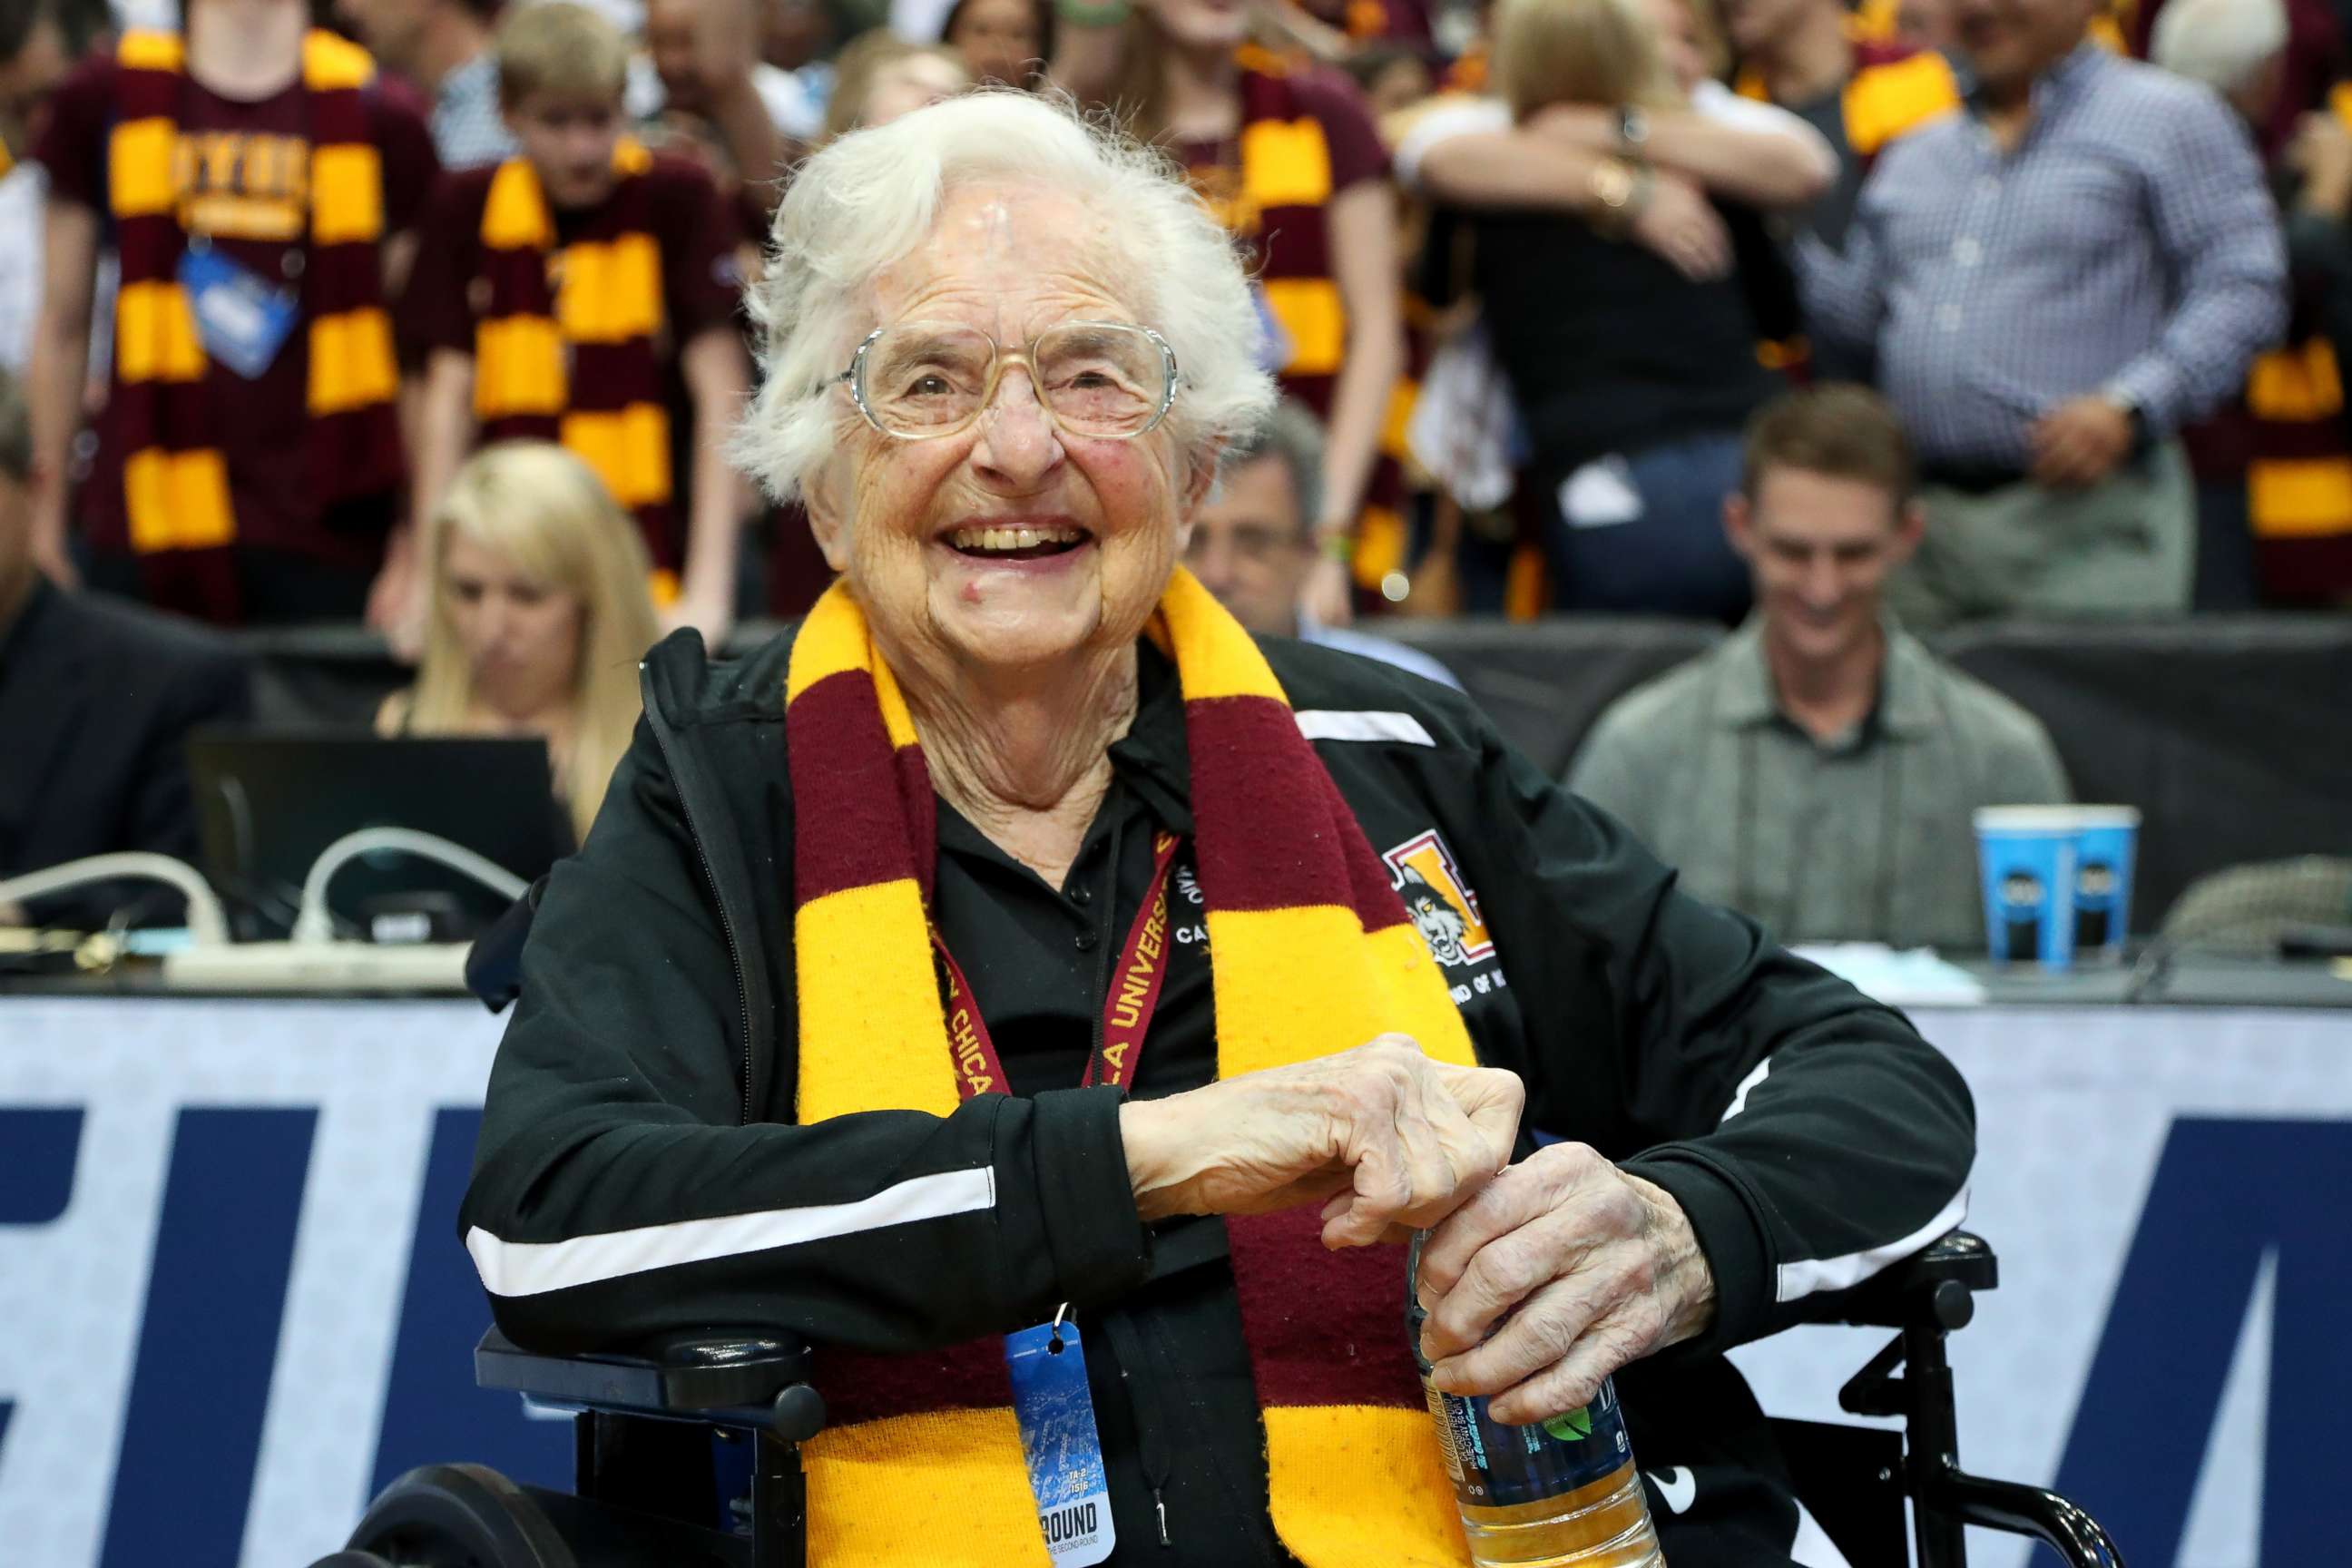 PHOTO: Sister Jean Dolores-Schmidt celebrates after the Loyola Ramblers beat the Tennessee Volunteers 63-62 in the second round of the 2018 NCAA Tournament at the American Airlines Center, March 17, 2018 in Dallas.